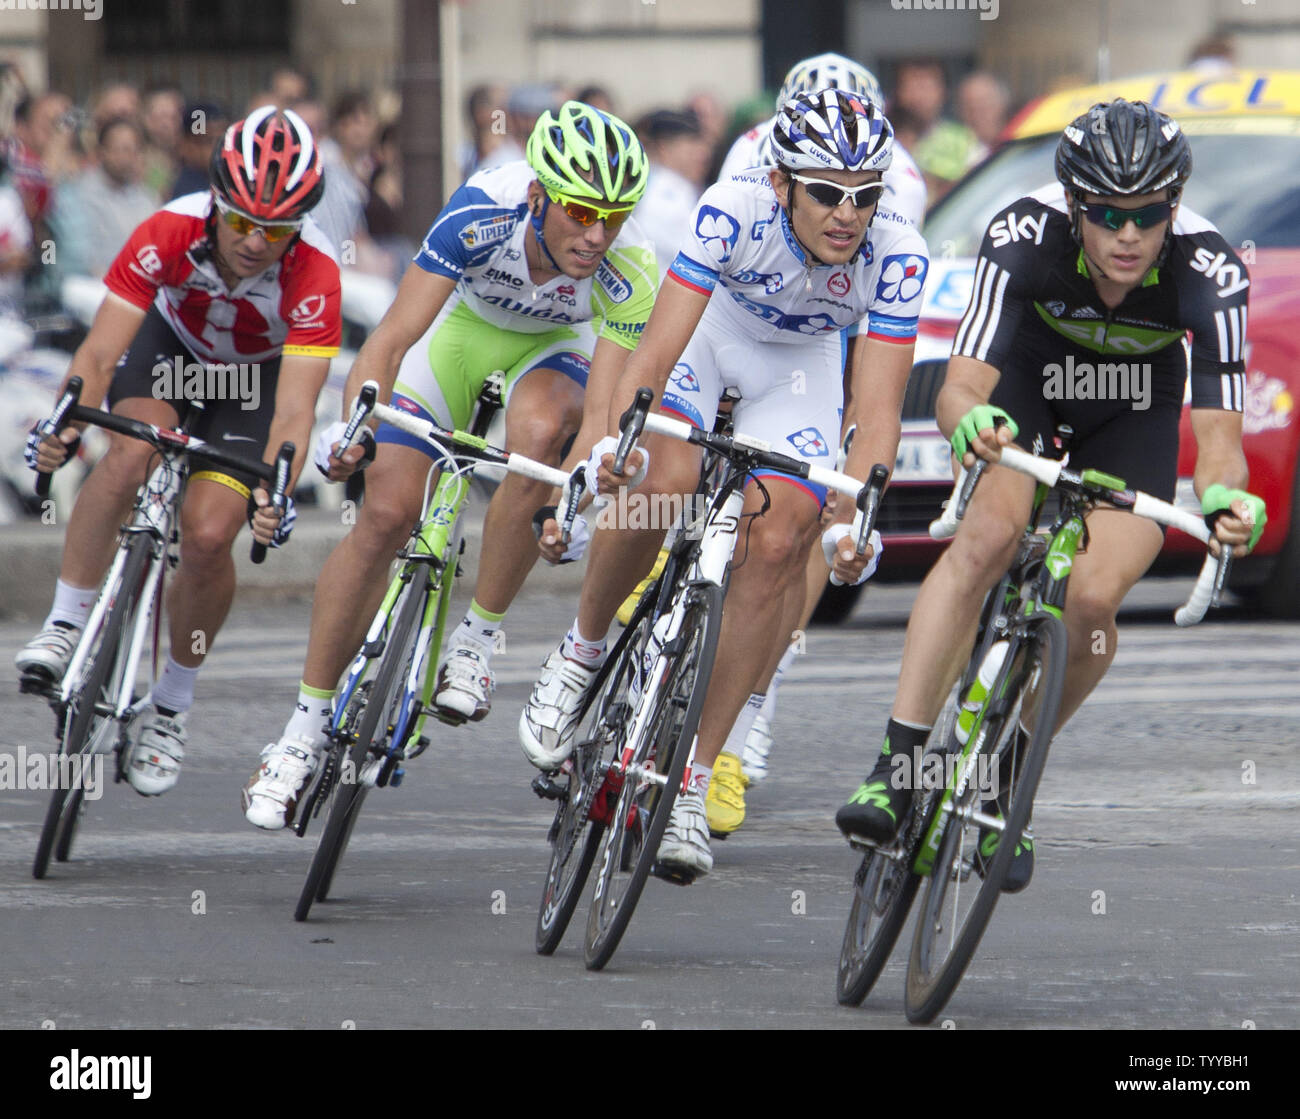 Competitors ride through the Place de la Concorde during the final stage of the Tour de France in Paris on July 24, 2011.  Cadel Evans won the event for the first time, becoming the first Australian to do so.   UPI/David Silpa Stock Photo